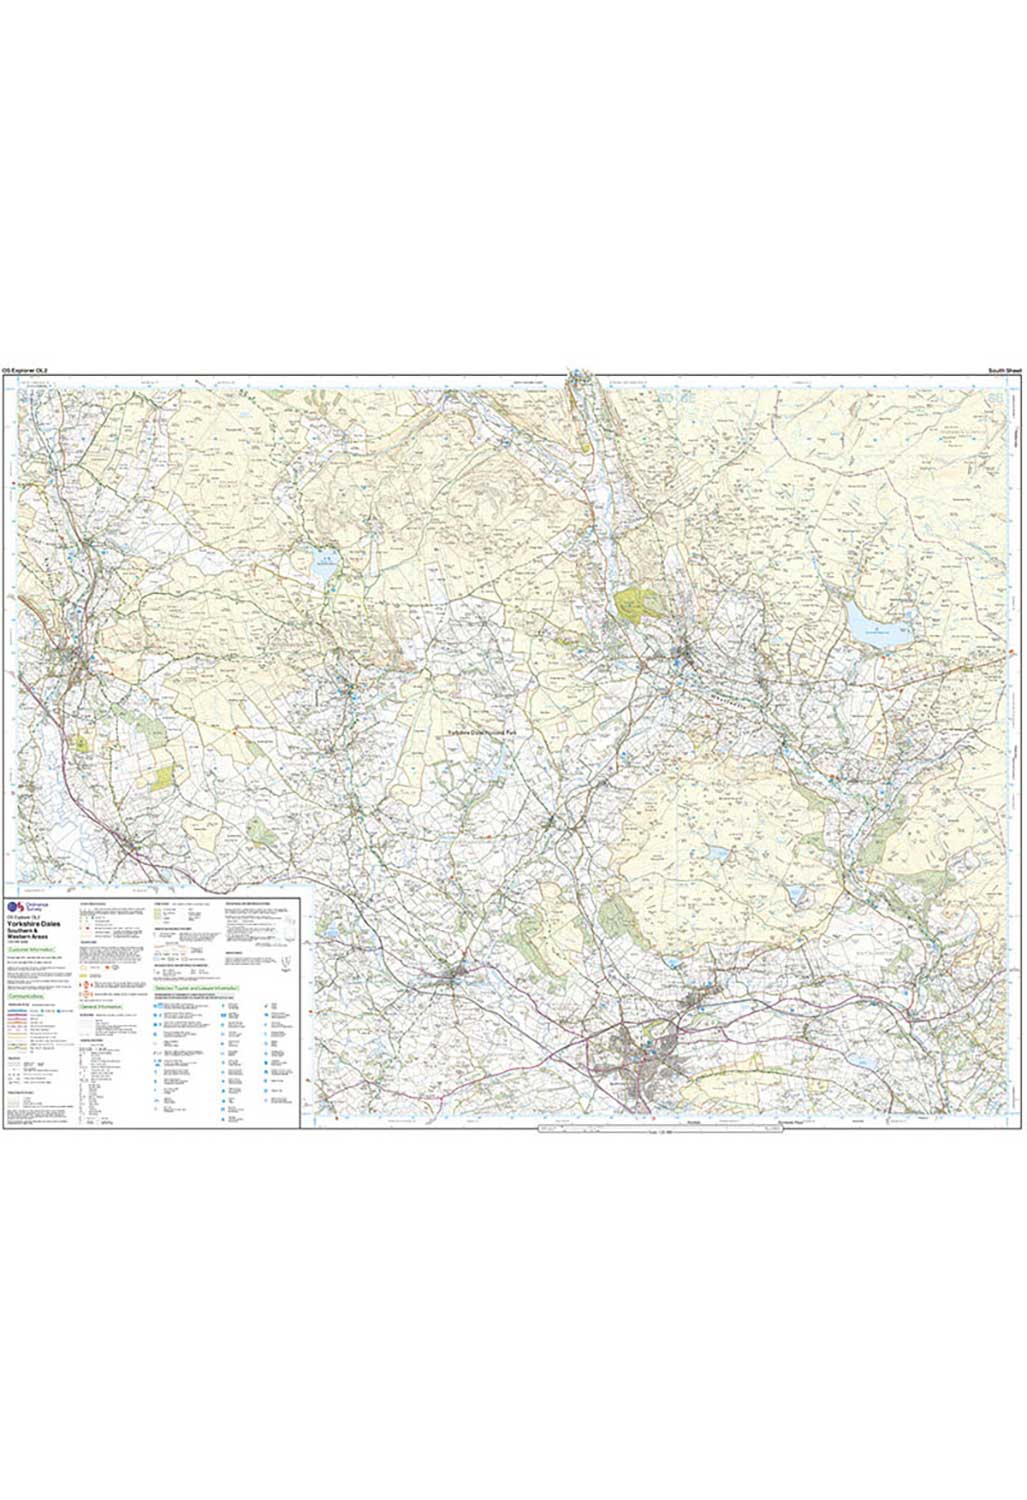 Ordnance Survey Yorkshire Dales - Southern & Western Areas - OS Explorer OL2 Map